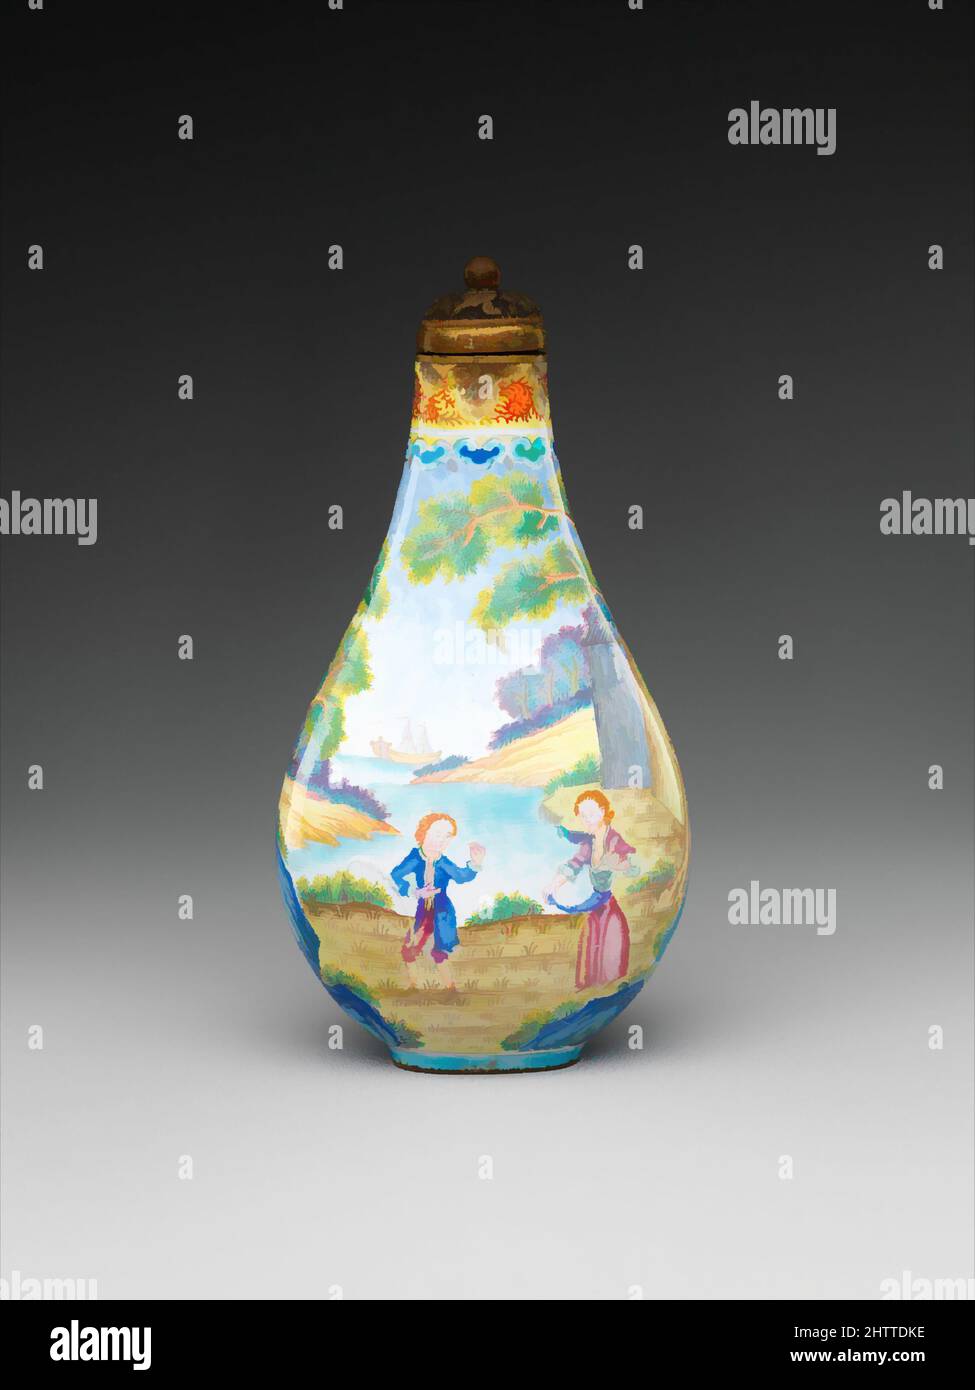 Snuff bottle with European figures, Qing dynasty (1644–1911), Qianlong period (1736–95), China, Painted enamel, H. 2 7/8 in. (7.3 cm); W. 1 1/2 in. (3.8 cm); D. 1 in. (2.5 cm), Snuff Bottles, This snuff bottles illustrates the frequent contact between China and the West during the Qing dynasty (1644–1911), when not only the technique, painted enamel, but also the decorative motifs, Western figures in a landscape setting, were introduced from Europe Stock Photo